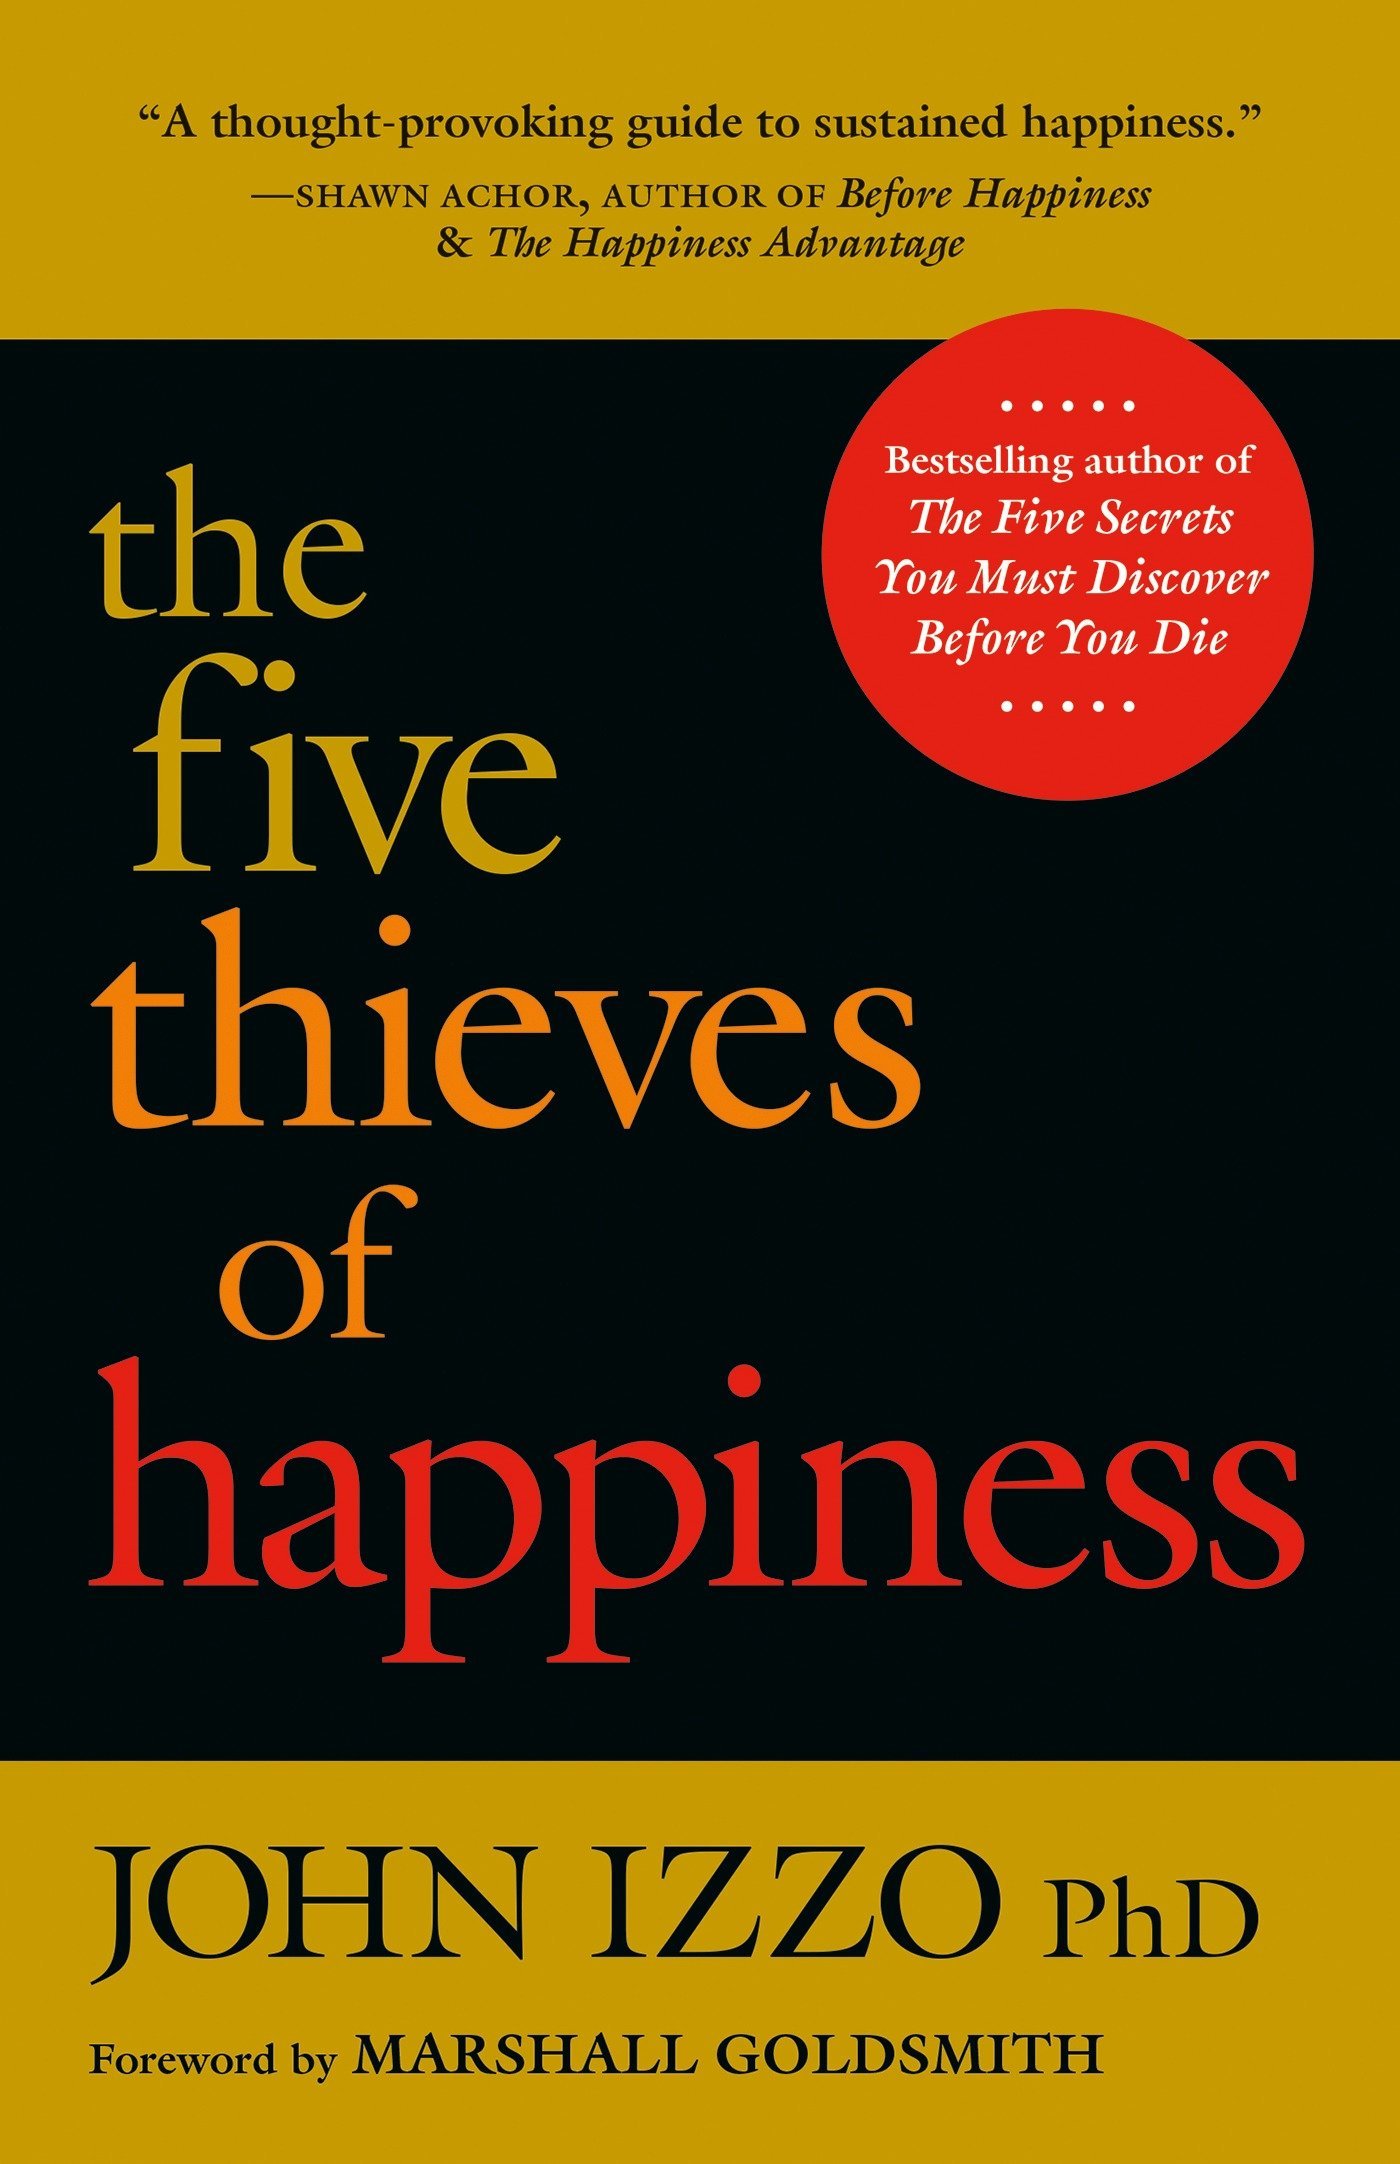 The Five Thieves of Happiness PDF Summary